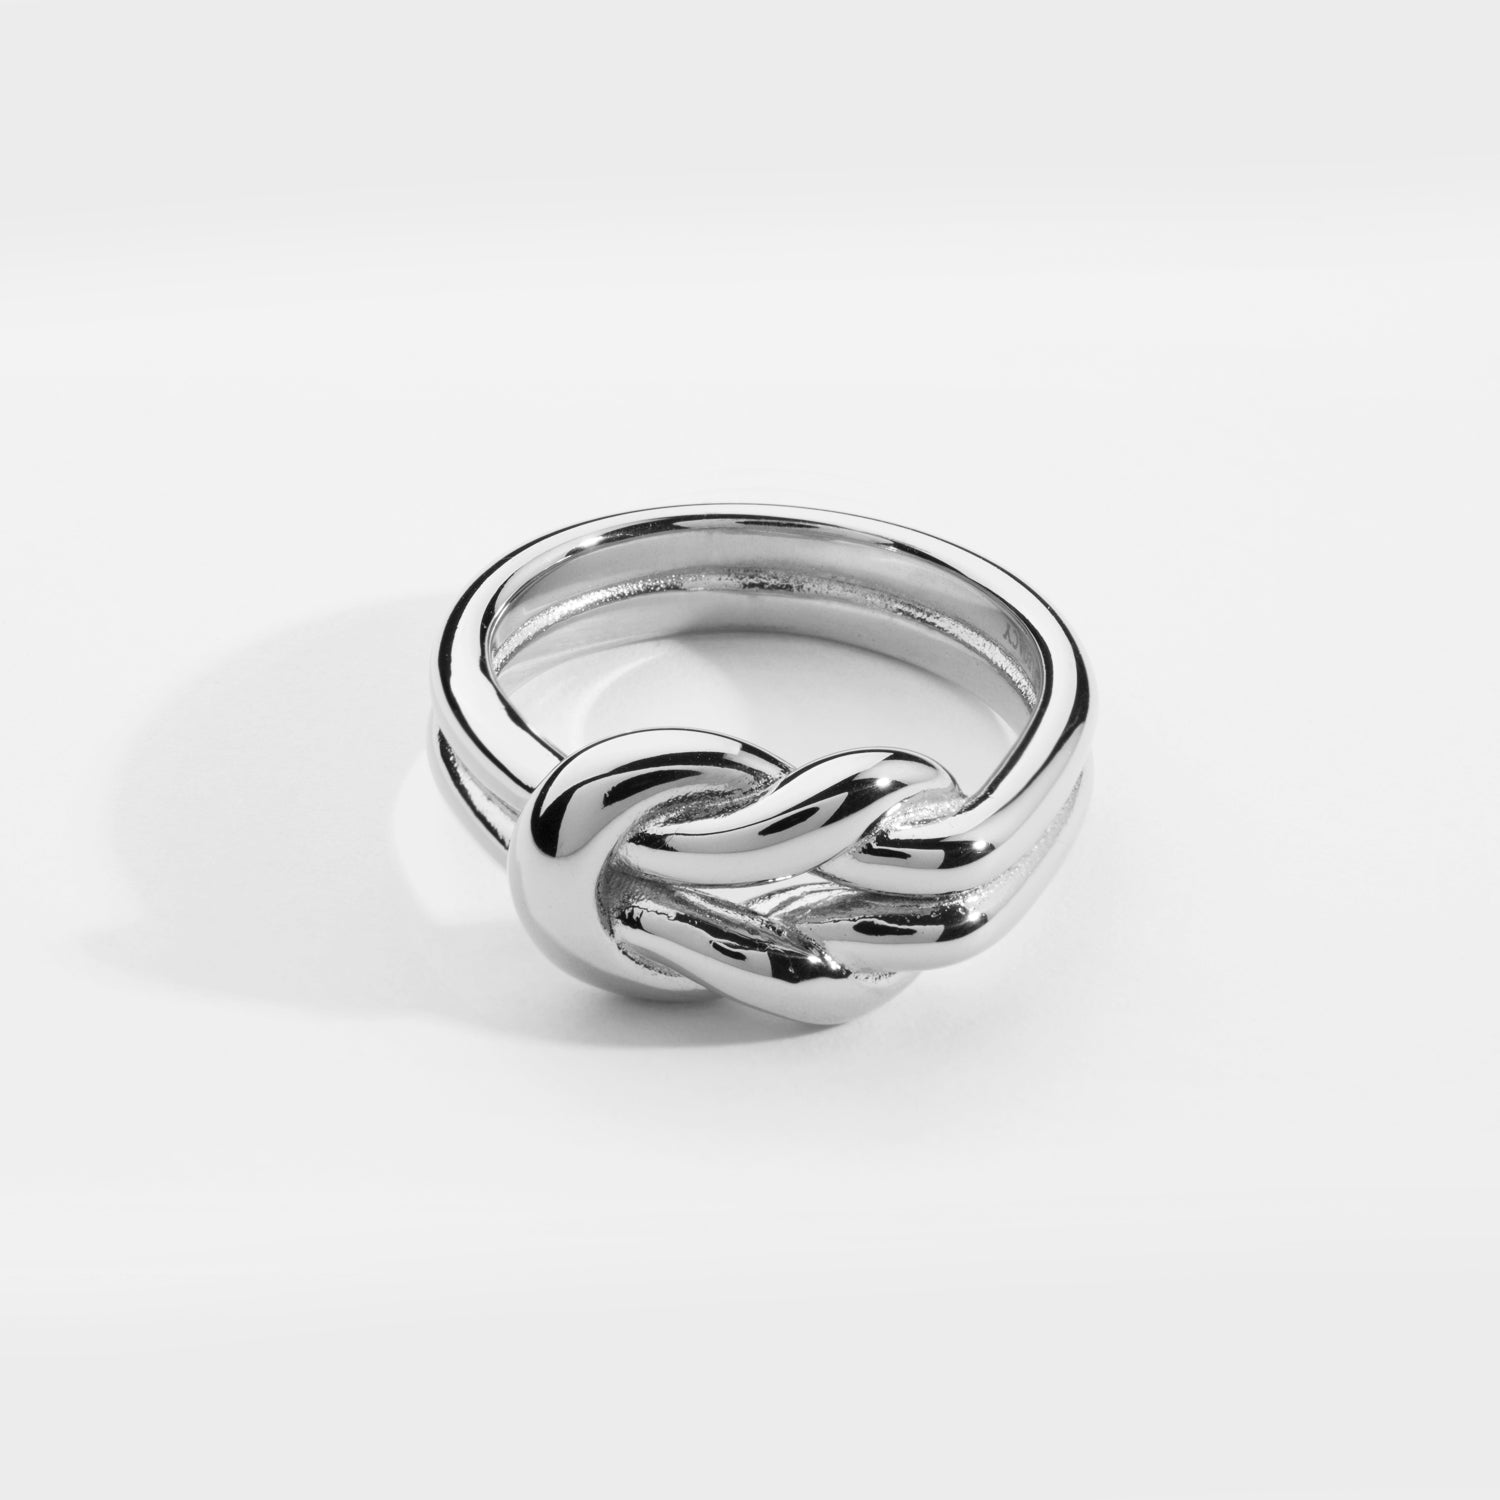 Perpetual band ring - Silver-toned